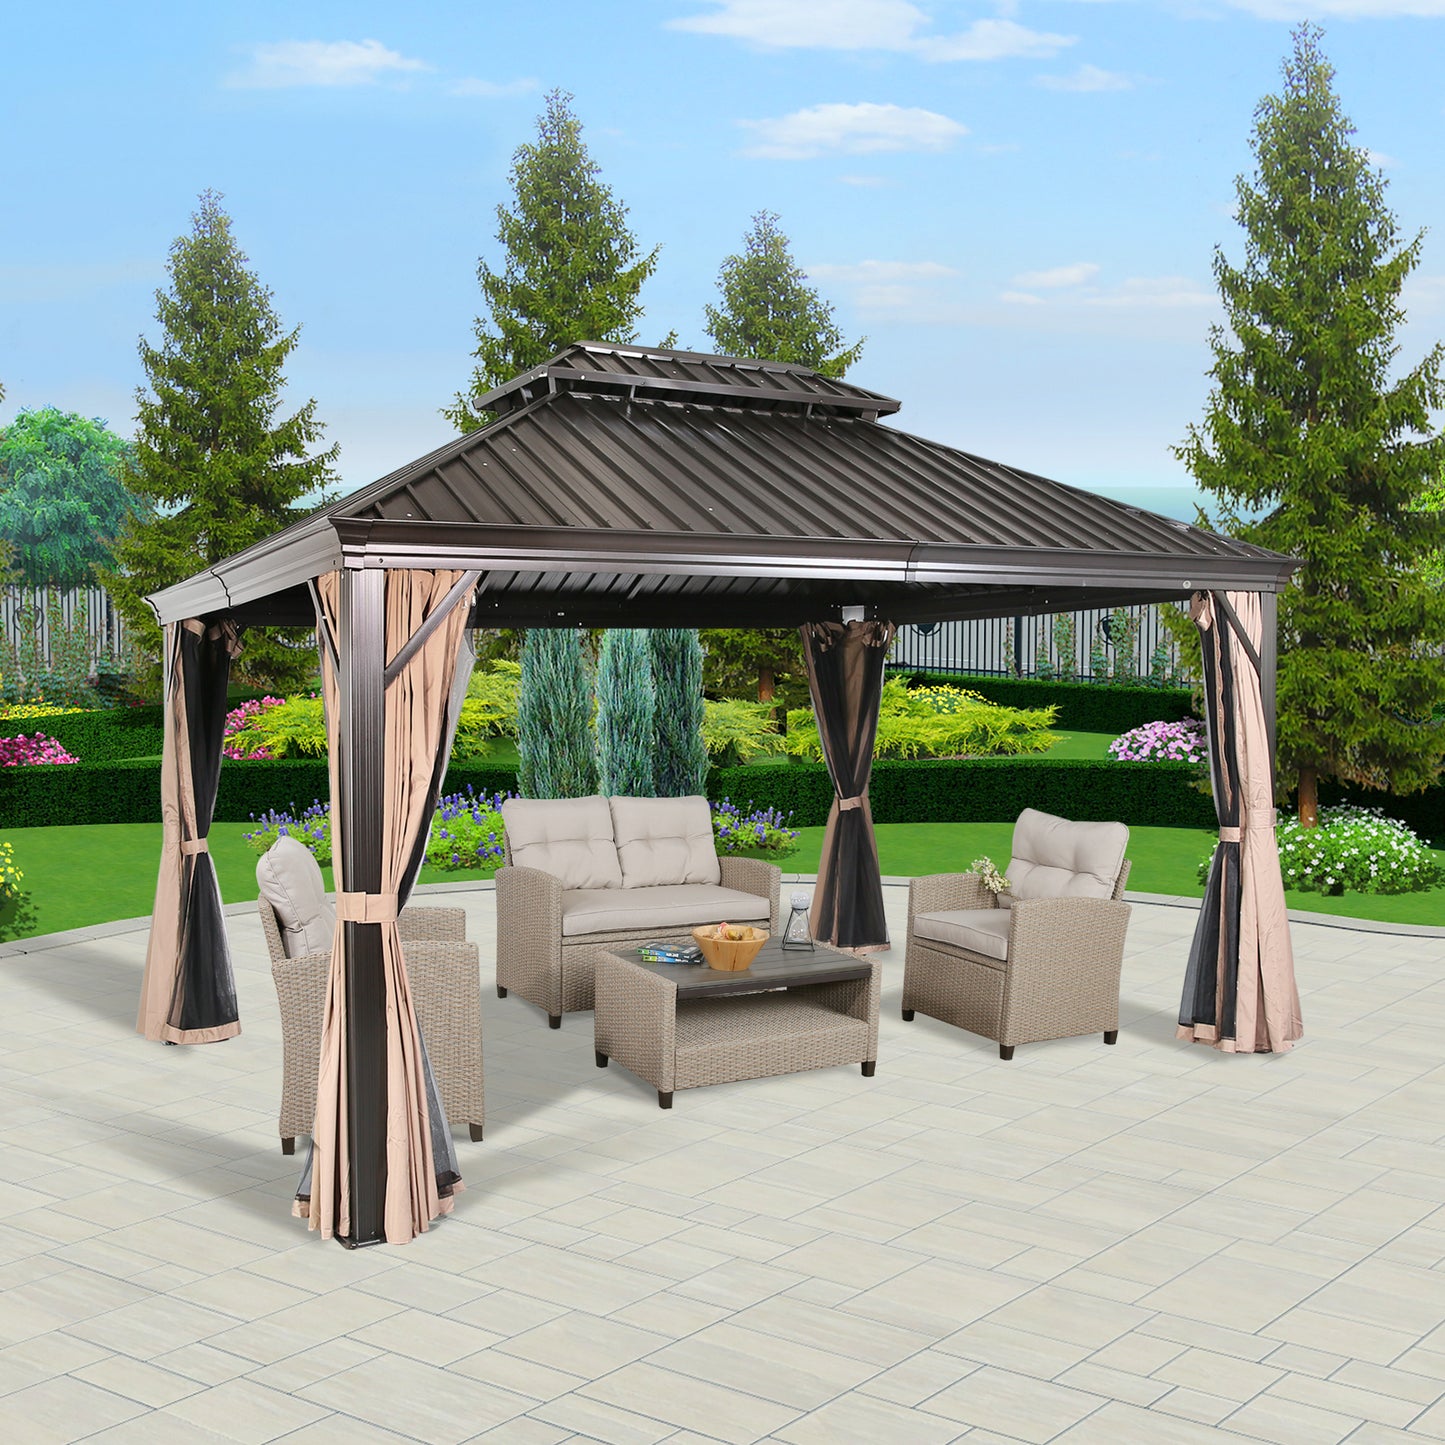 10Ft x 12Ft Patio Hardtop Gazebo Outdoor Aluminum Pergola with Galvanized Steel Roof Canopy, Polyester Curtain and Mosquito Net